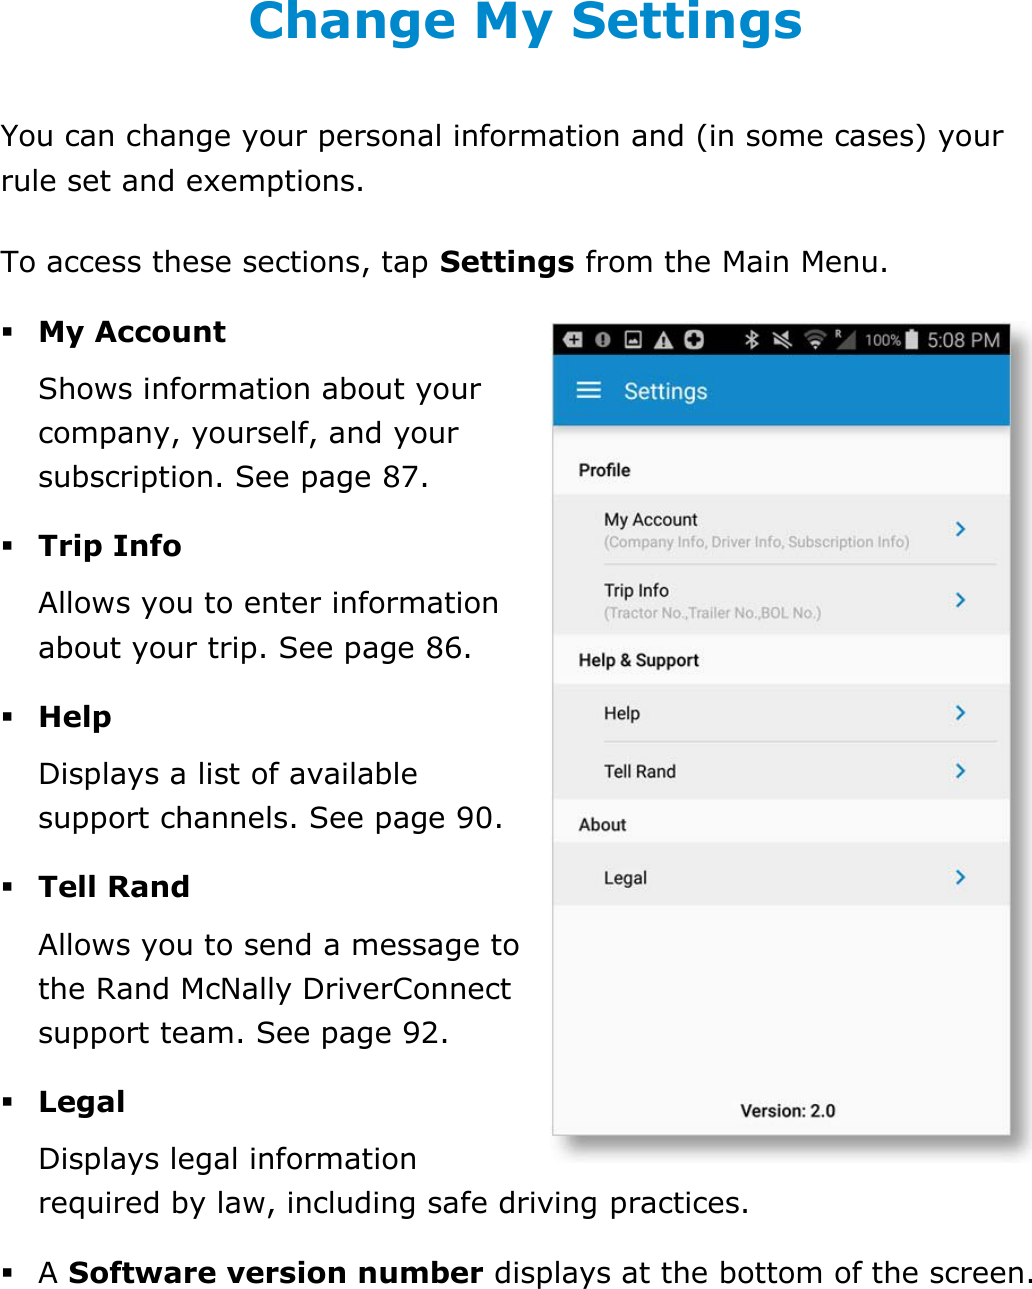 Change My Settings DriverConnect User Guide  80 © 2016-2017, Rand McNally, Inc. Change My Settings You can change your personal information and (in some cases) your rule set and exemptions. To access these sections, tap Settings from the Main Menu.  My Account Shows information about your company, yourself, and your subscription. See page 87.  Trip Info Allows you to enter information about your trip. See page 86.  Help Displays a list of available support channels. See page 90.  Tell Rand Allows you to send a message to the Rand McNally DriverConnect support team. See page 92.  Legal Displays legal information required by law, including safe driving practices.  A Software version number displays at the bottom of the screen.    